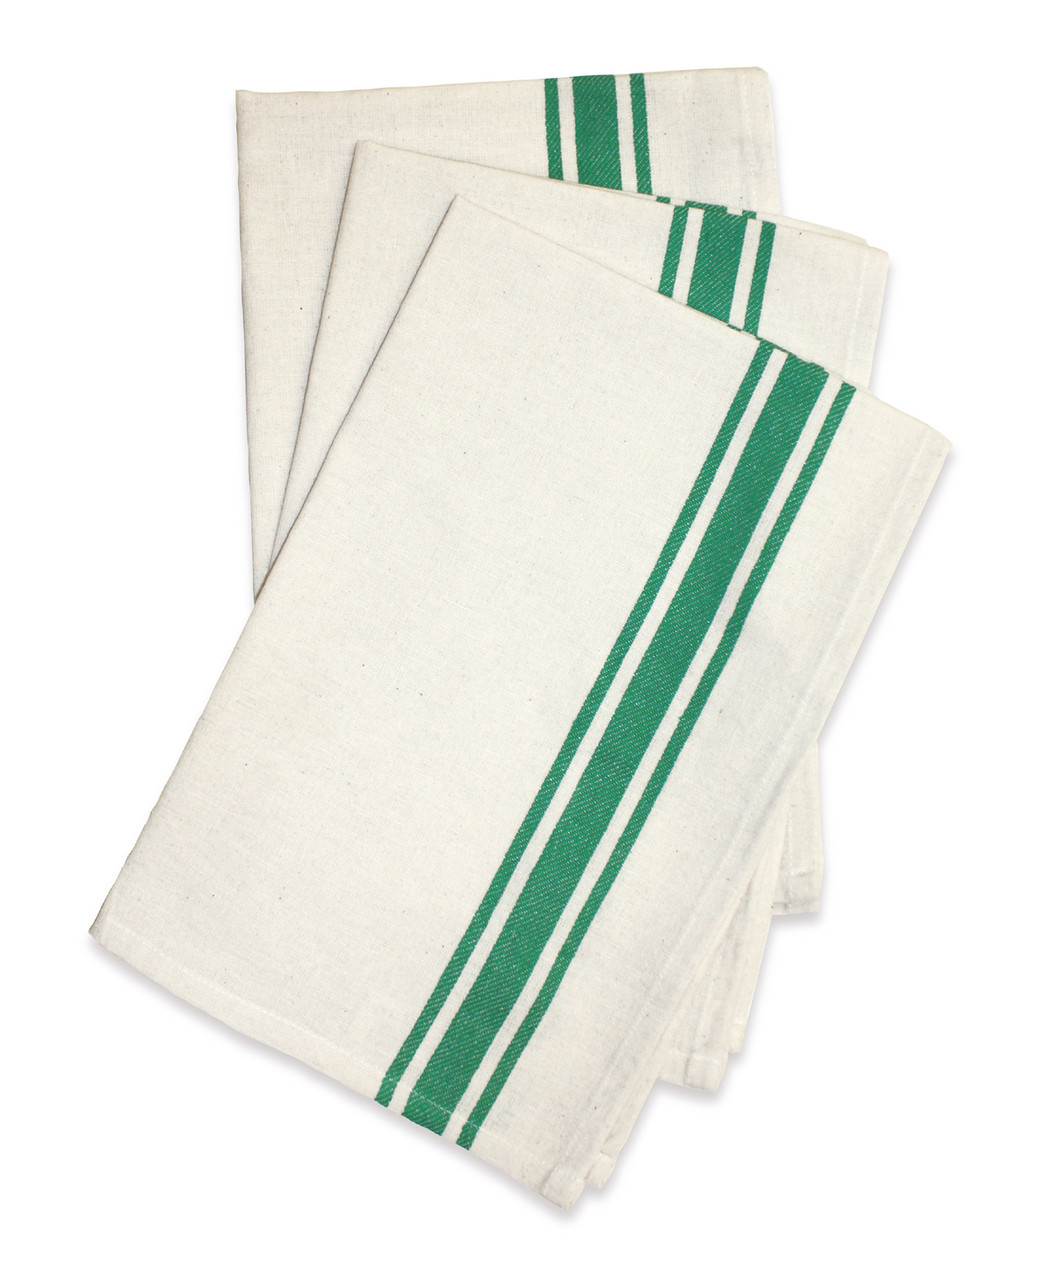 White Tea Towels for Embroidery and Kitchen 18x28 inch Cotton Fabric Pack  of 6